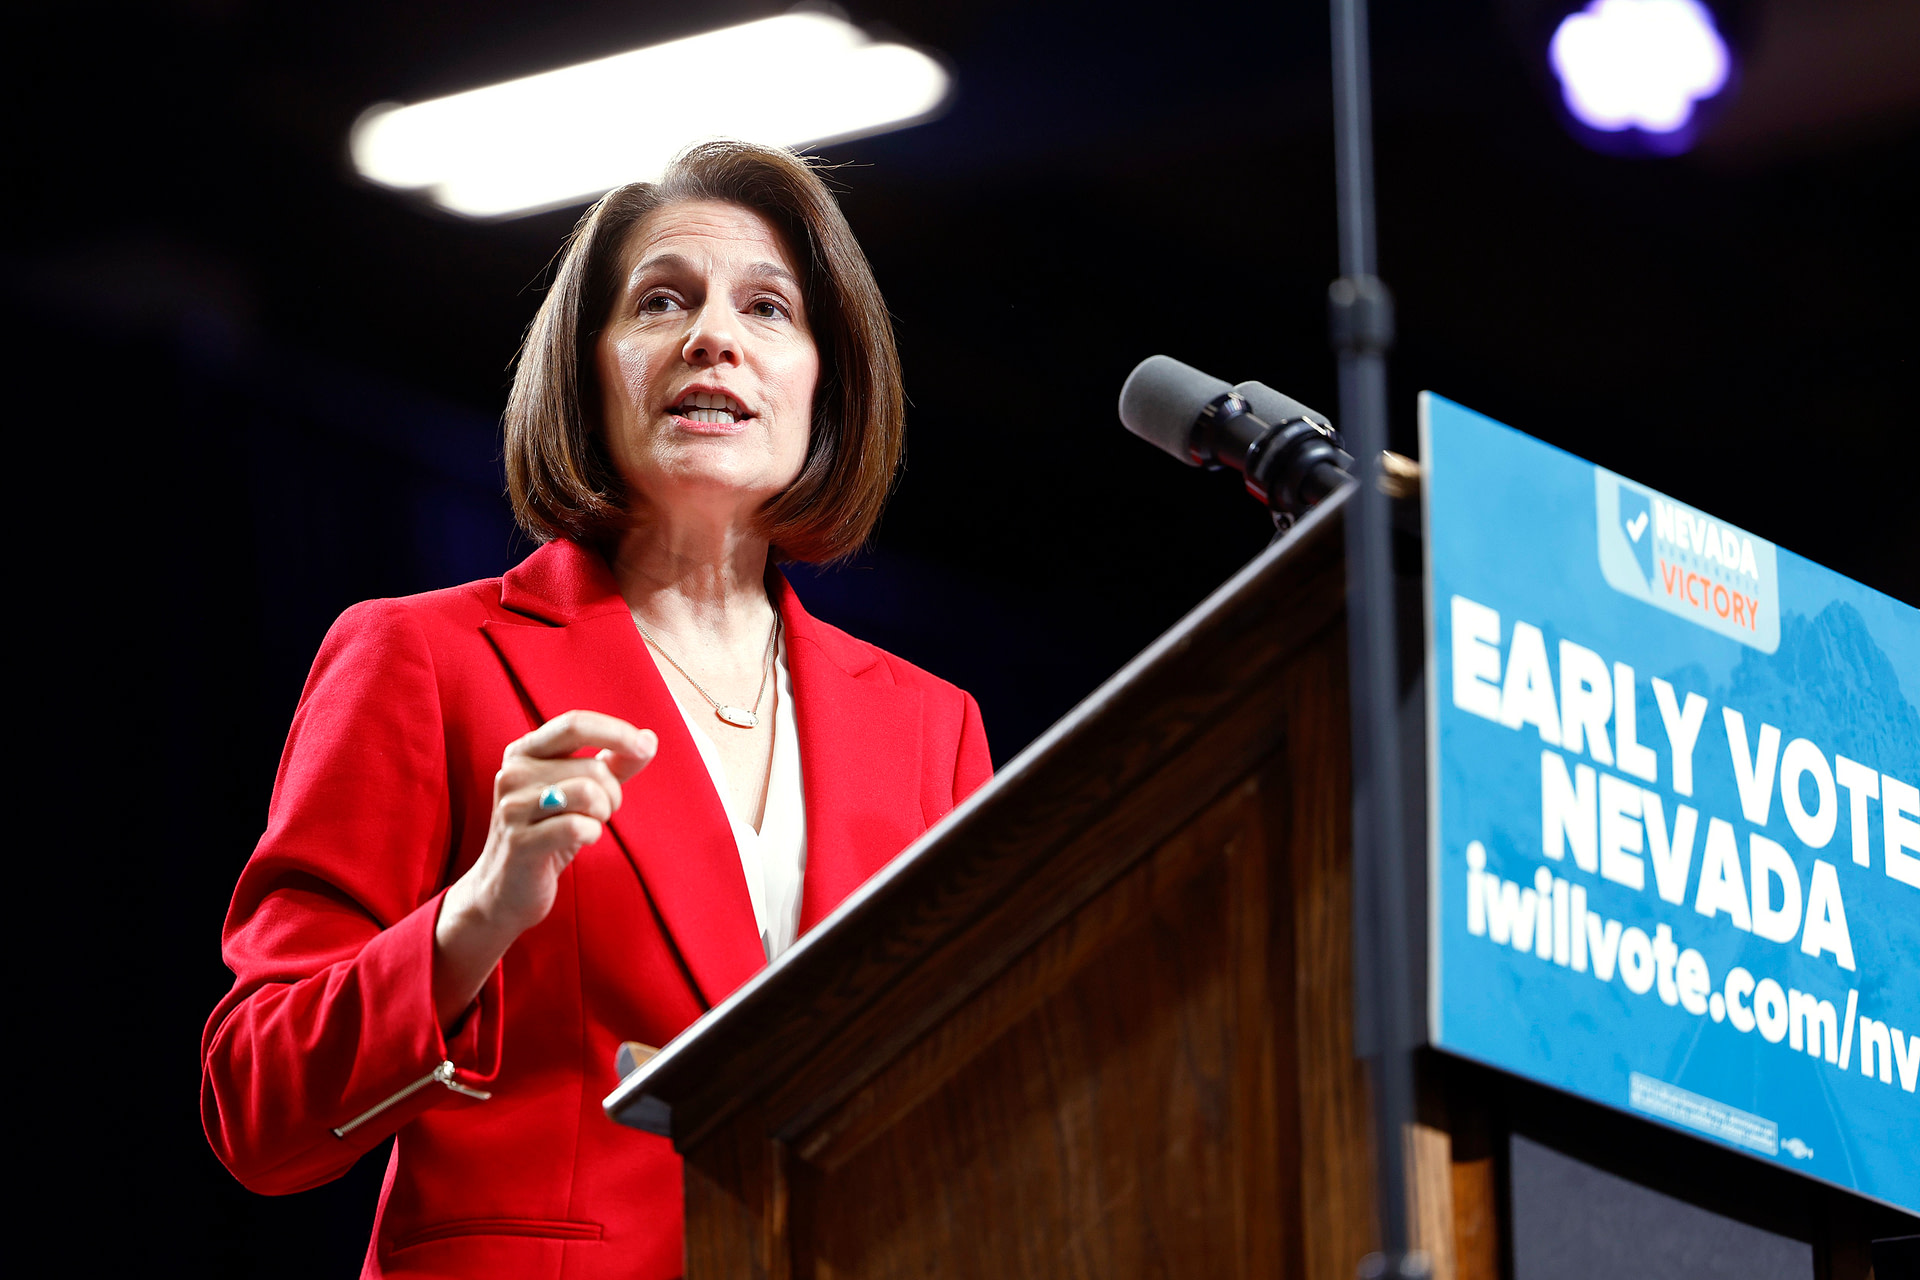 In Nevada, Cortez Masto taunts Laxalt with new ads boasting his family endorsed her